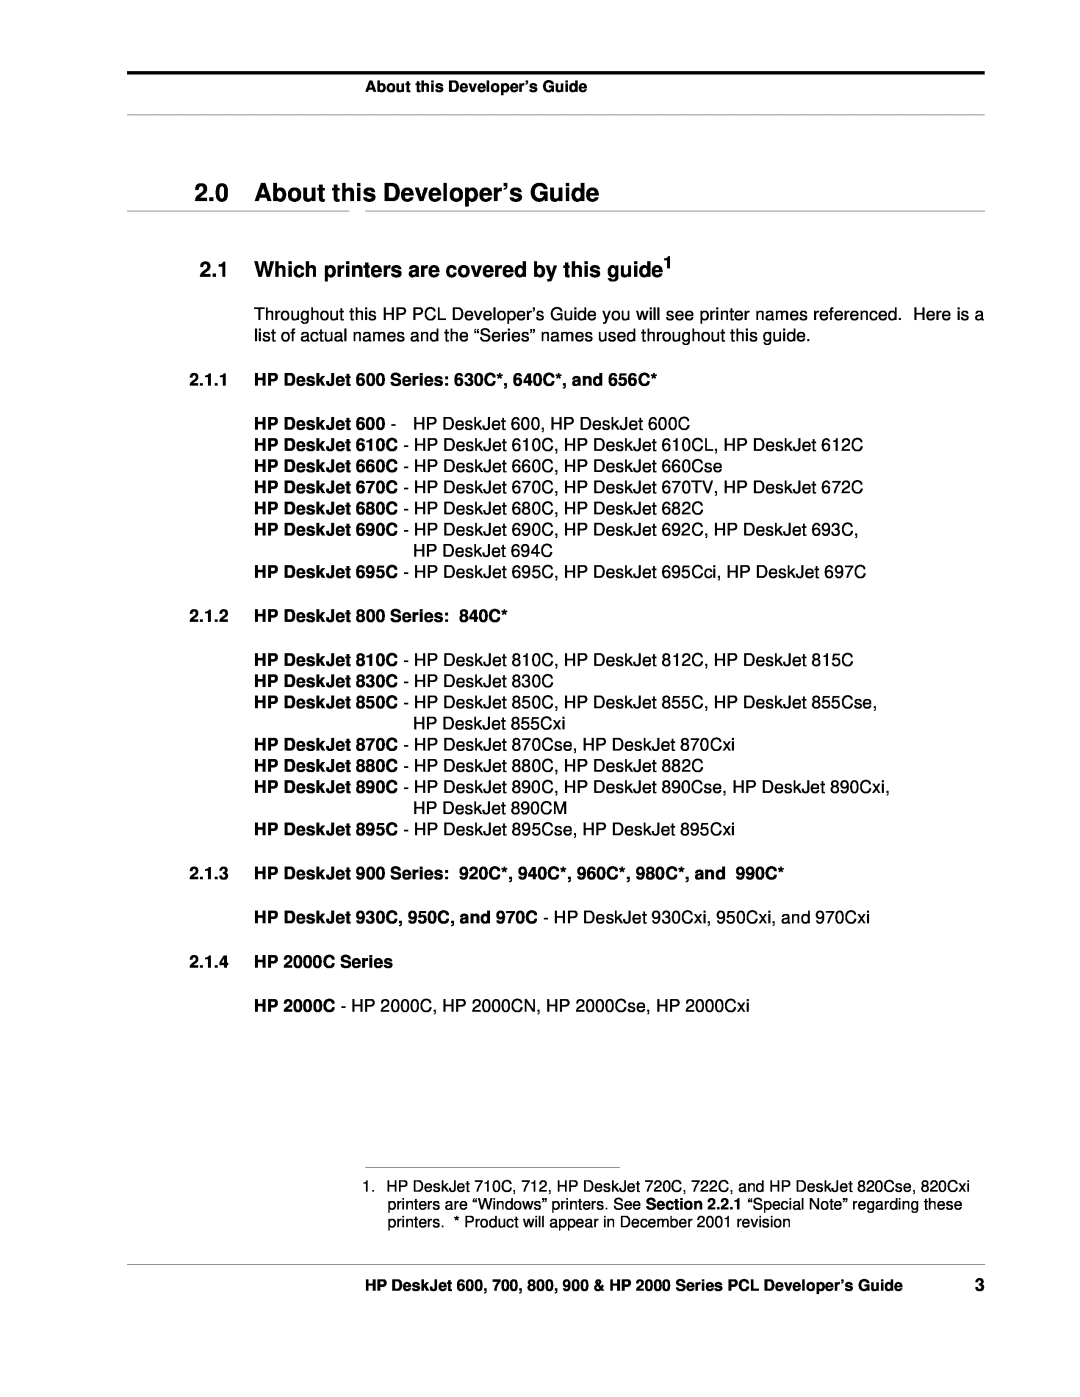 HP 700 manual About this Developer’s Guide, Which printers are covered by this guide1, HP DeskJet 800 Series 840C 